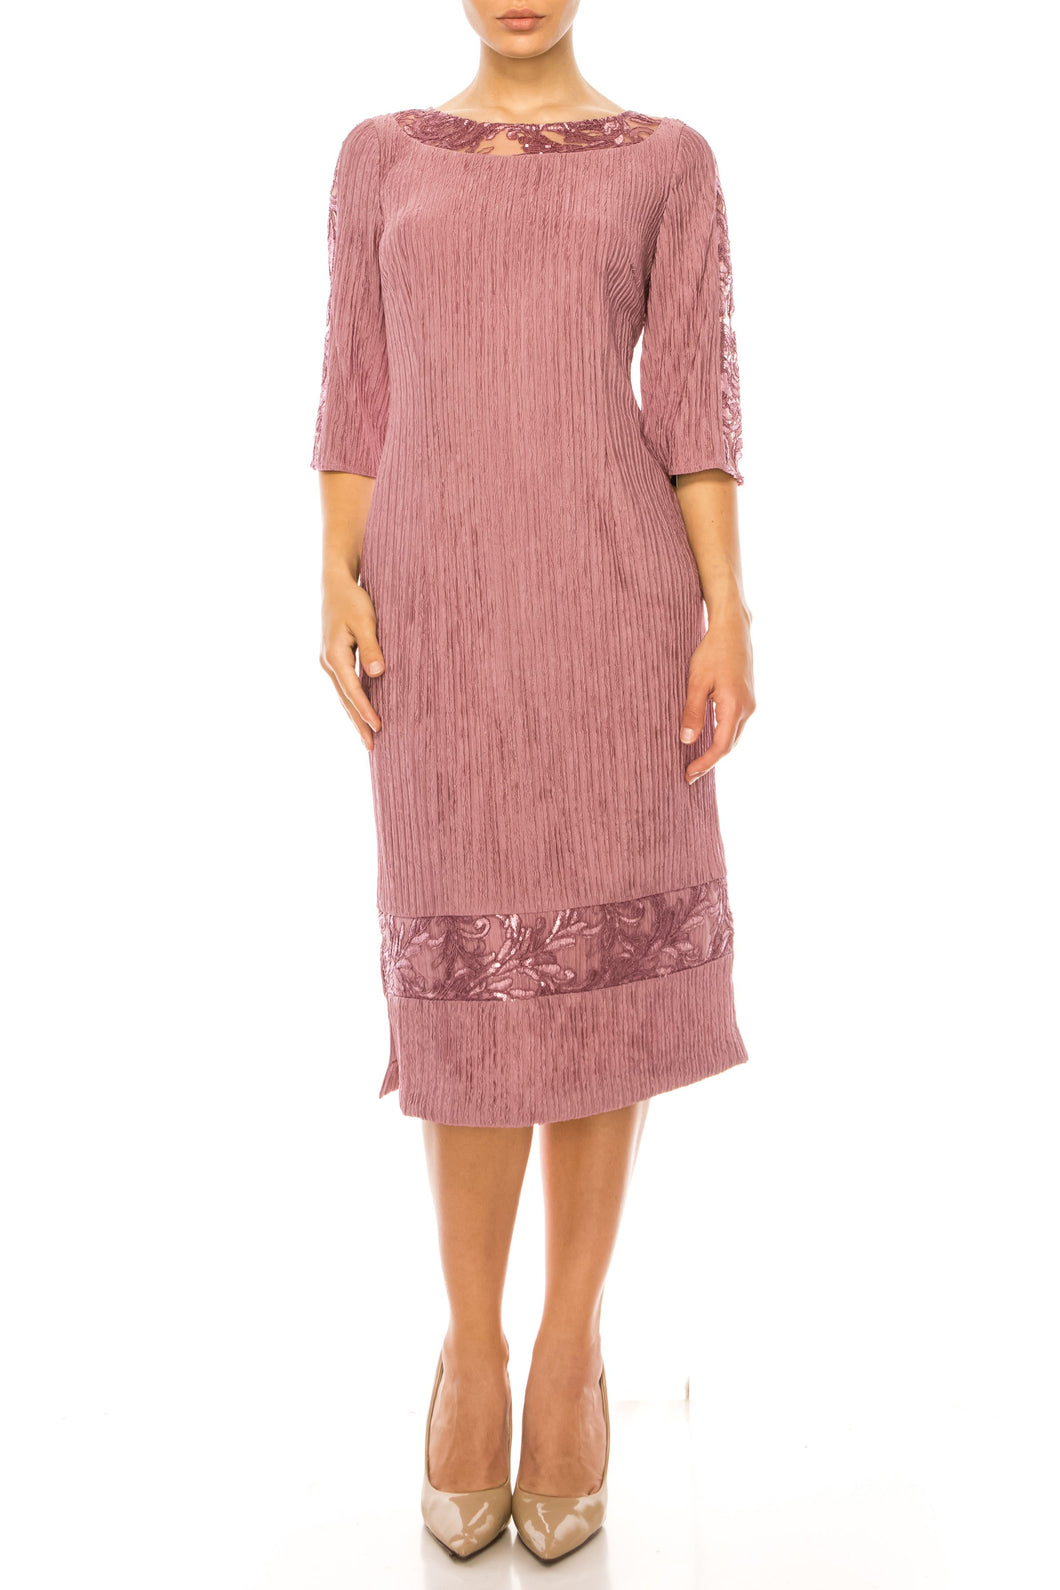 Brianna Milay Rosey Sheath Cocktail Party Midi Dress Sizes 8 & 16 Remaining!